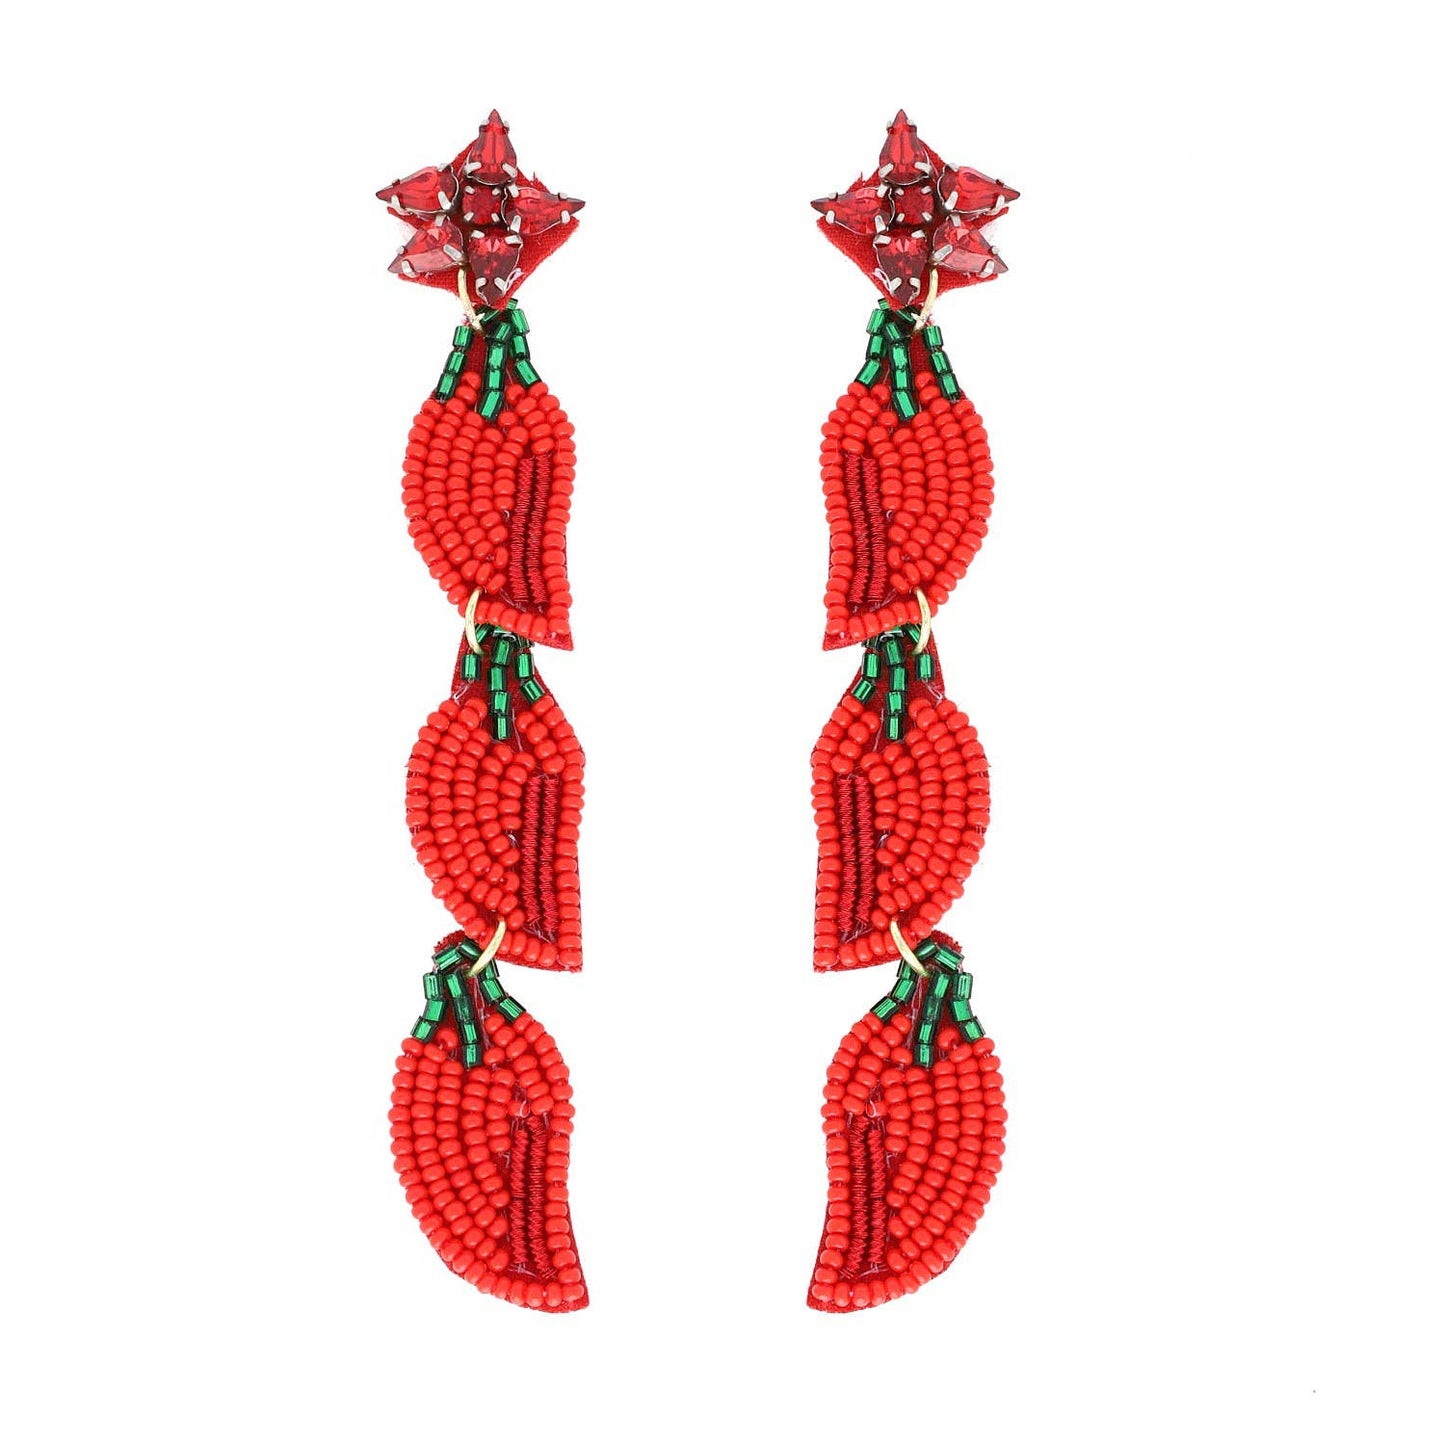 SP Sophia Collection - 4 Tier Jeweled Beaded Chili Peppers Long Dangle Earrings